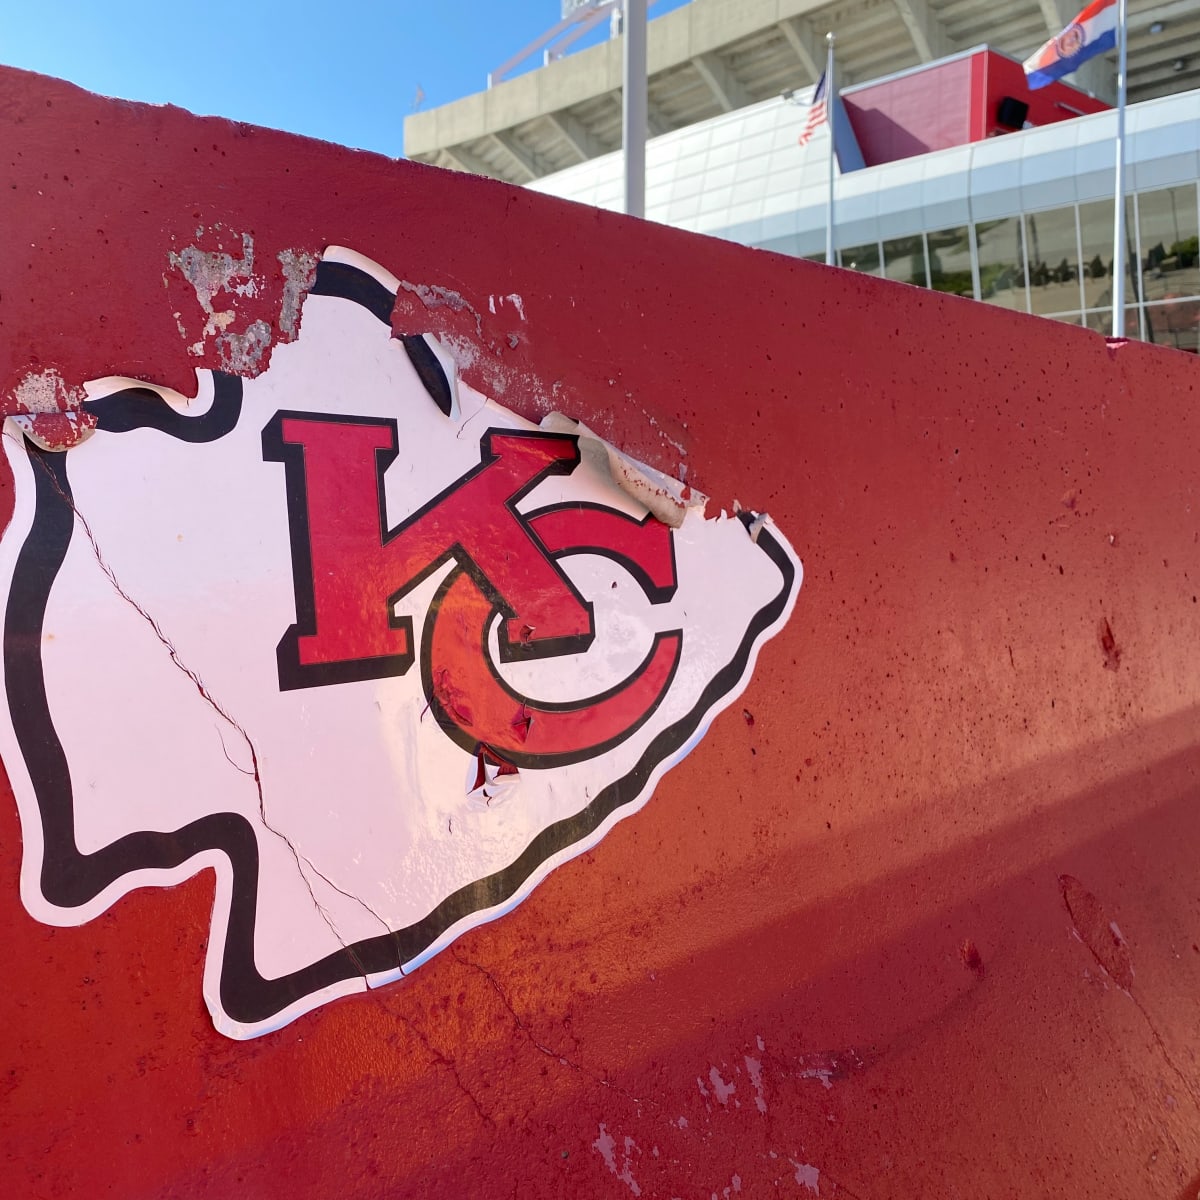 Native American advocates protest Kansas City Chiefs name ahead of